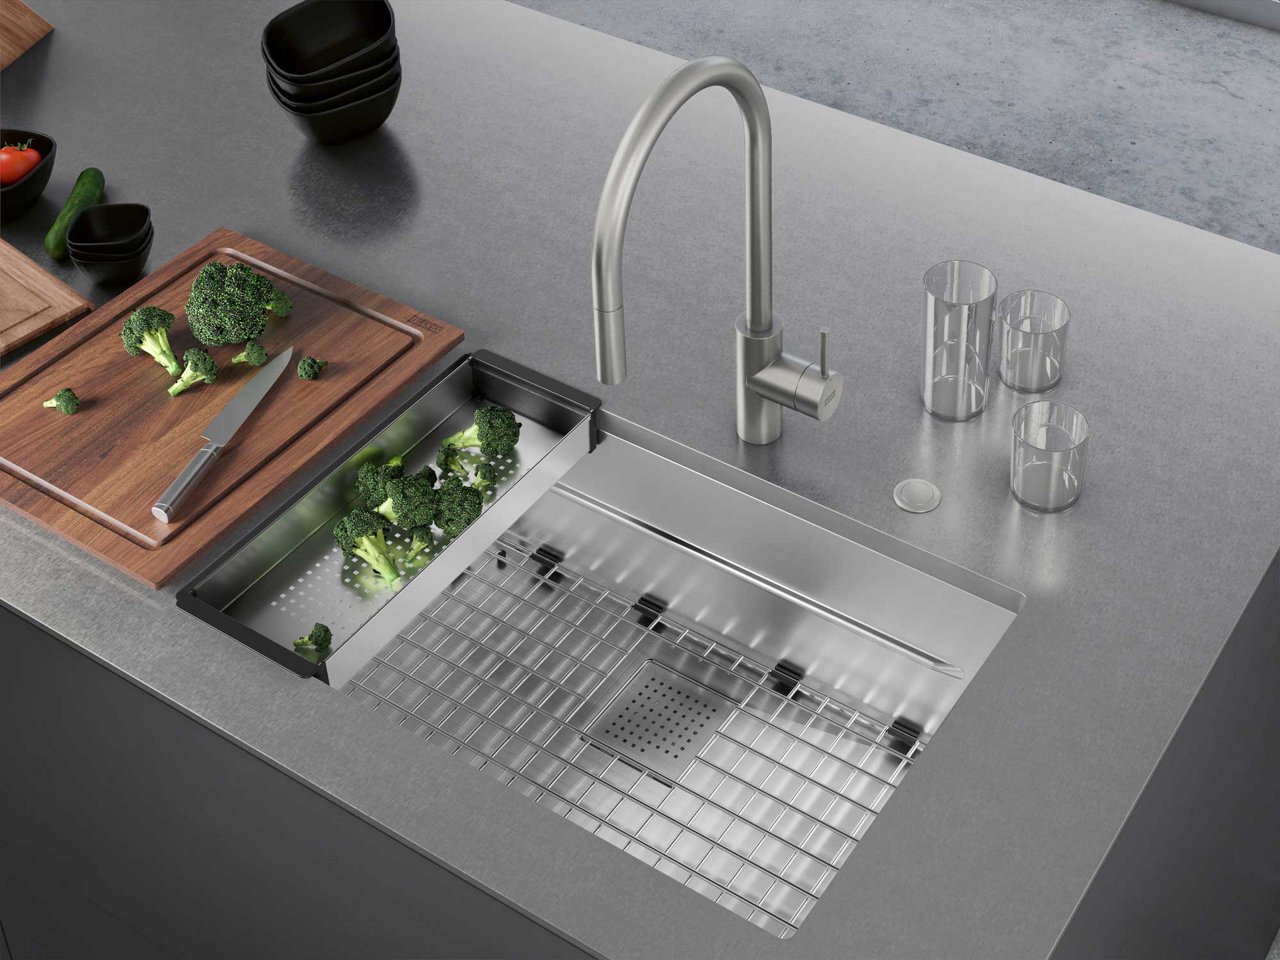 Franke Peak stainless steel single bowl kitchen sink with bottom grid, sink colander and cutting board in a stainless steel countertop 